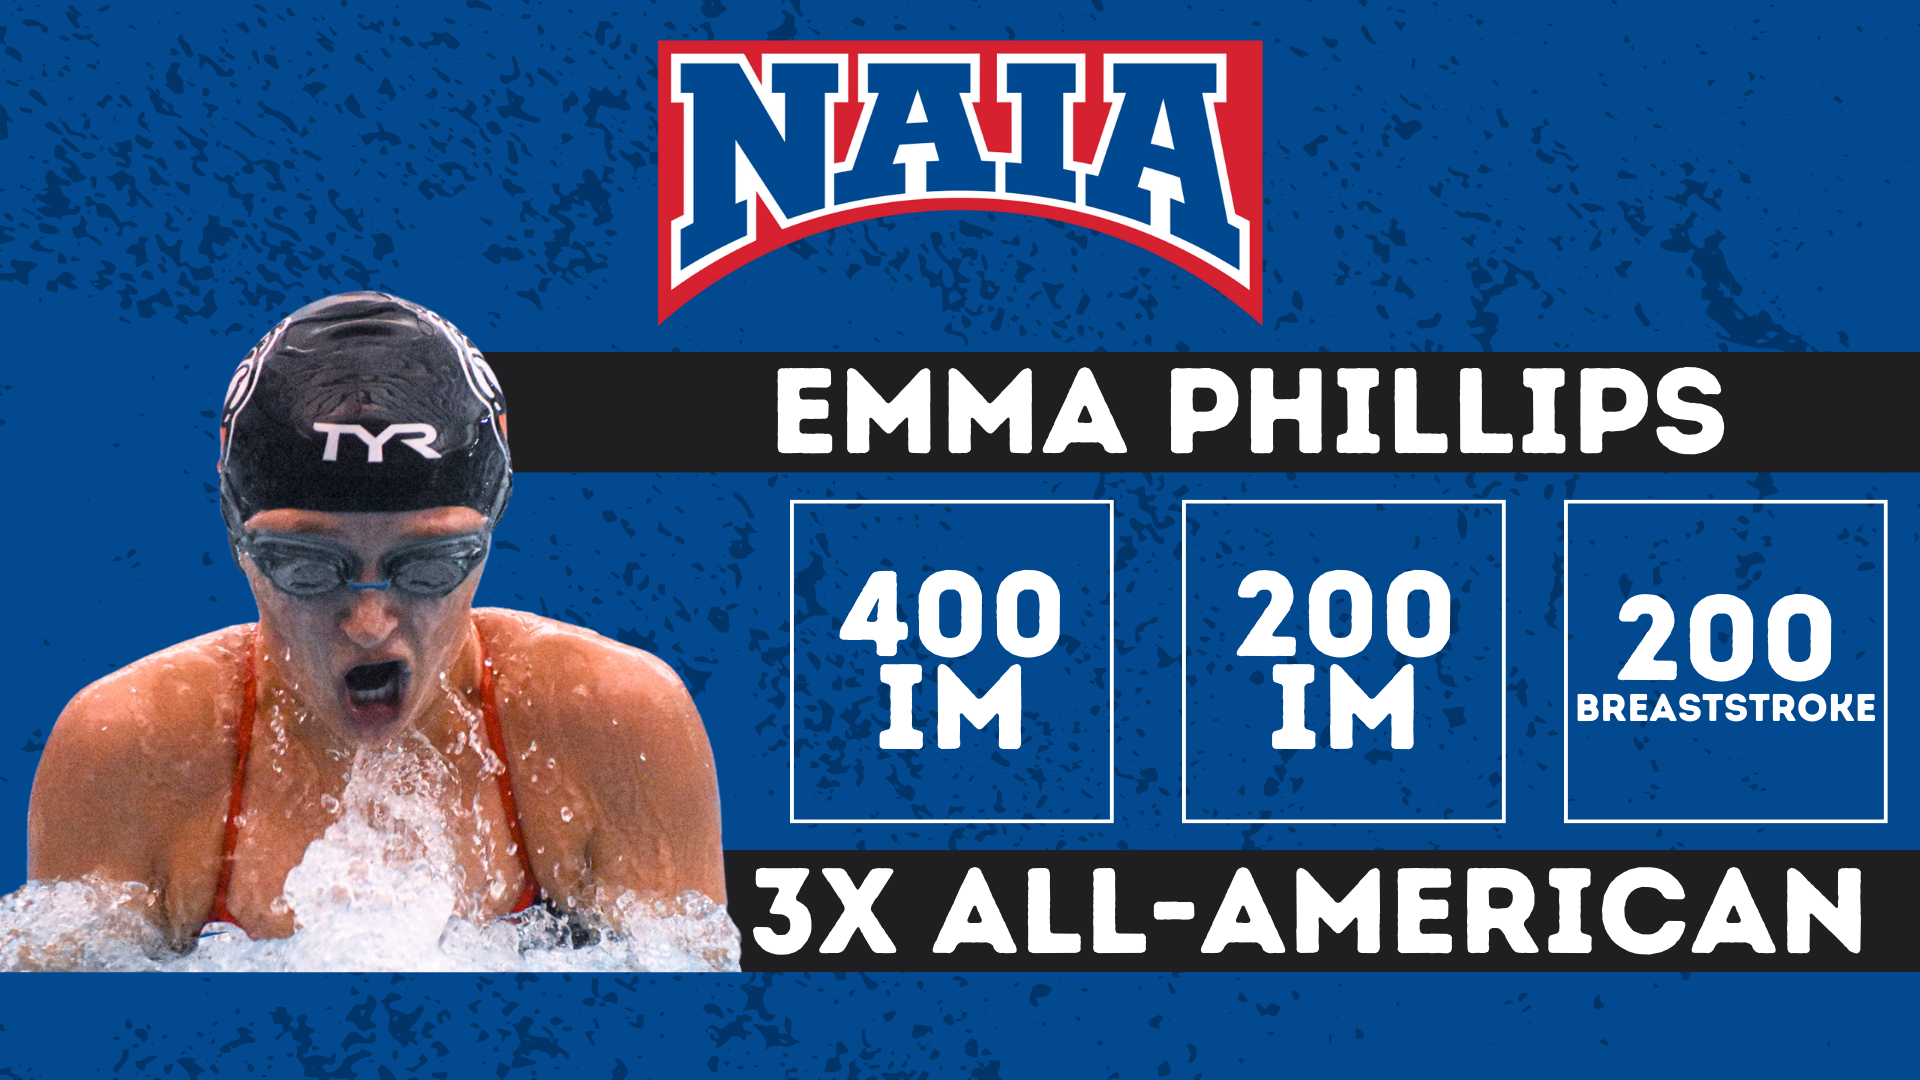 Union freshman Emma Phillips receives multiple NAIA All-American honors